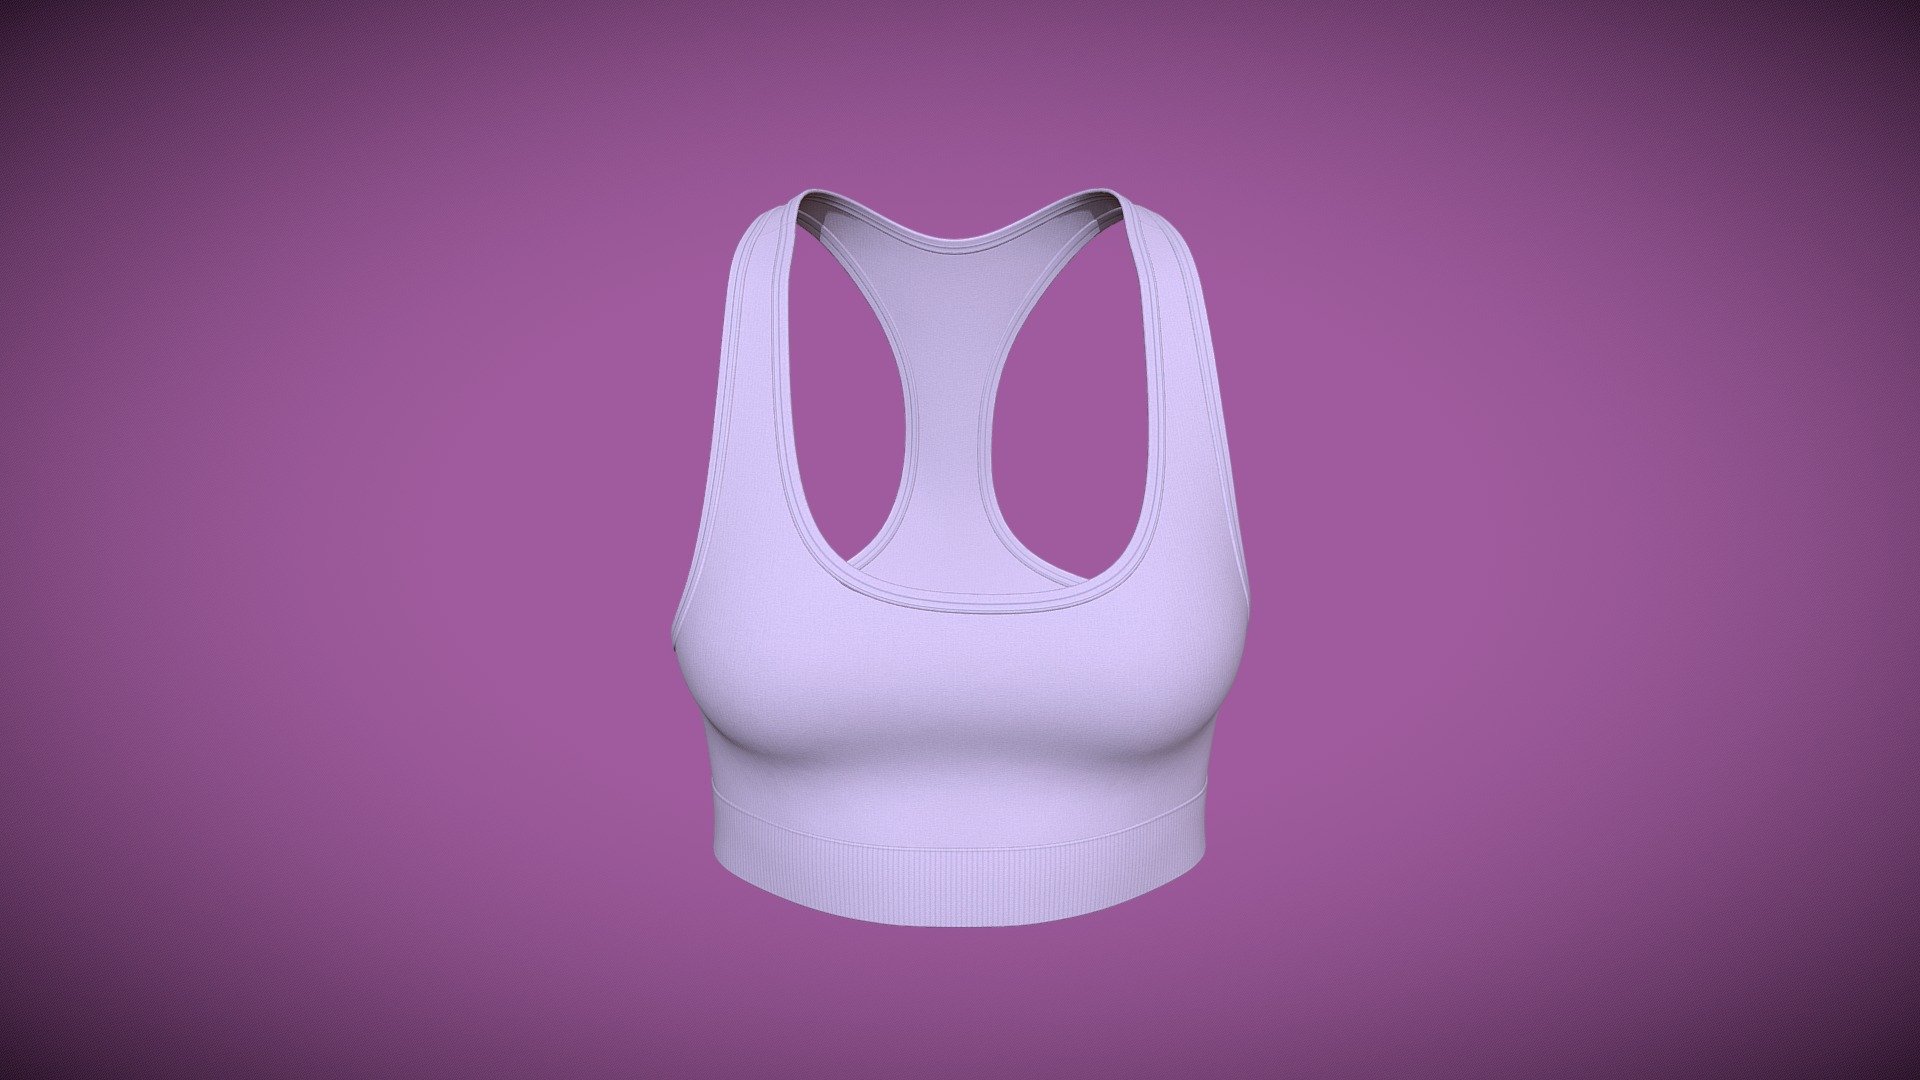 Cloth Title = Seamless Anna sports bra 

SKU = DG100109 

Category = Women 

Product Type = Bra 

Cloth Length = Regular 

Body Fit = Slim Fit 

Occasion = Activewear 


Our Services:

3D Apparel Design.

OBJ,FBX,GLTF Making with High/Low Poly.

Fabric Digitalization.

Mockup making.

3D Teck Pack.

Pattern Making.

2D Illustration.

Cloth Animation and 360 Spin Video.


Contact us:- 

Email: info@digitalfashionwear.com 

Website: https://digitalfashionwear.com 

WhatsApp No: +8801759350445 


We designed all the types of cloth specially focused on product visualization, e-commerce, fitting, and production. 

We will design: 

T-shirts 

Polo shirts 

Hoodies 

Sweatshirt 

Jackets 

Shirts 

TankTops 

Trousers 

Bras 

Underwear 

Blazer 

Aprons 

Leggings 

and All Fashion items. 





Our goal is to make sure what we provide you, meets your demand 3d model